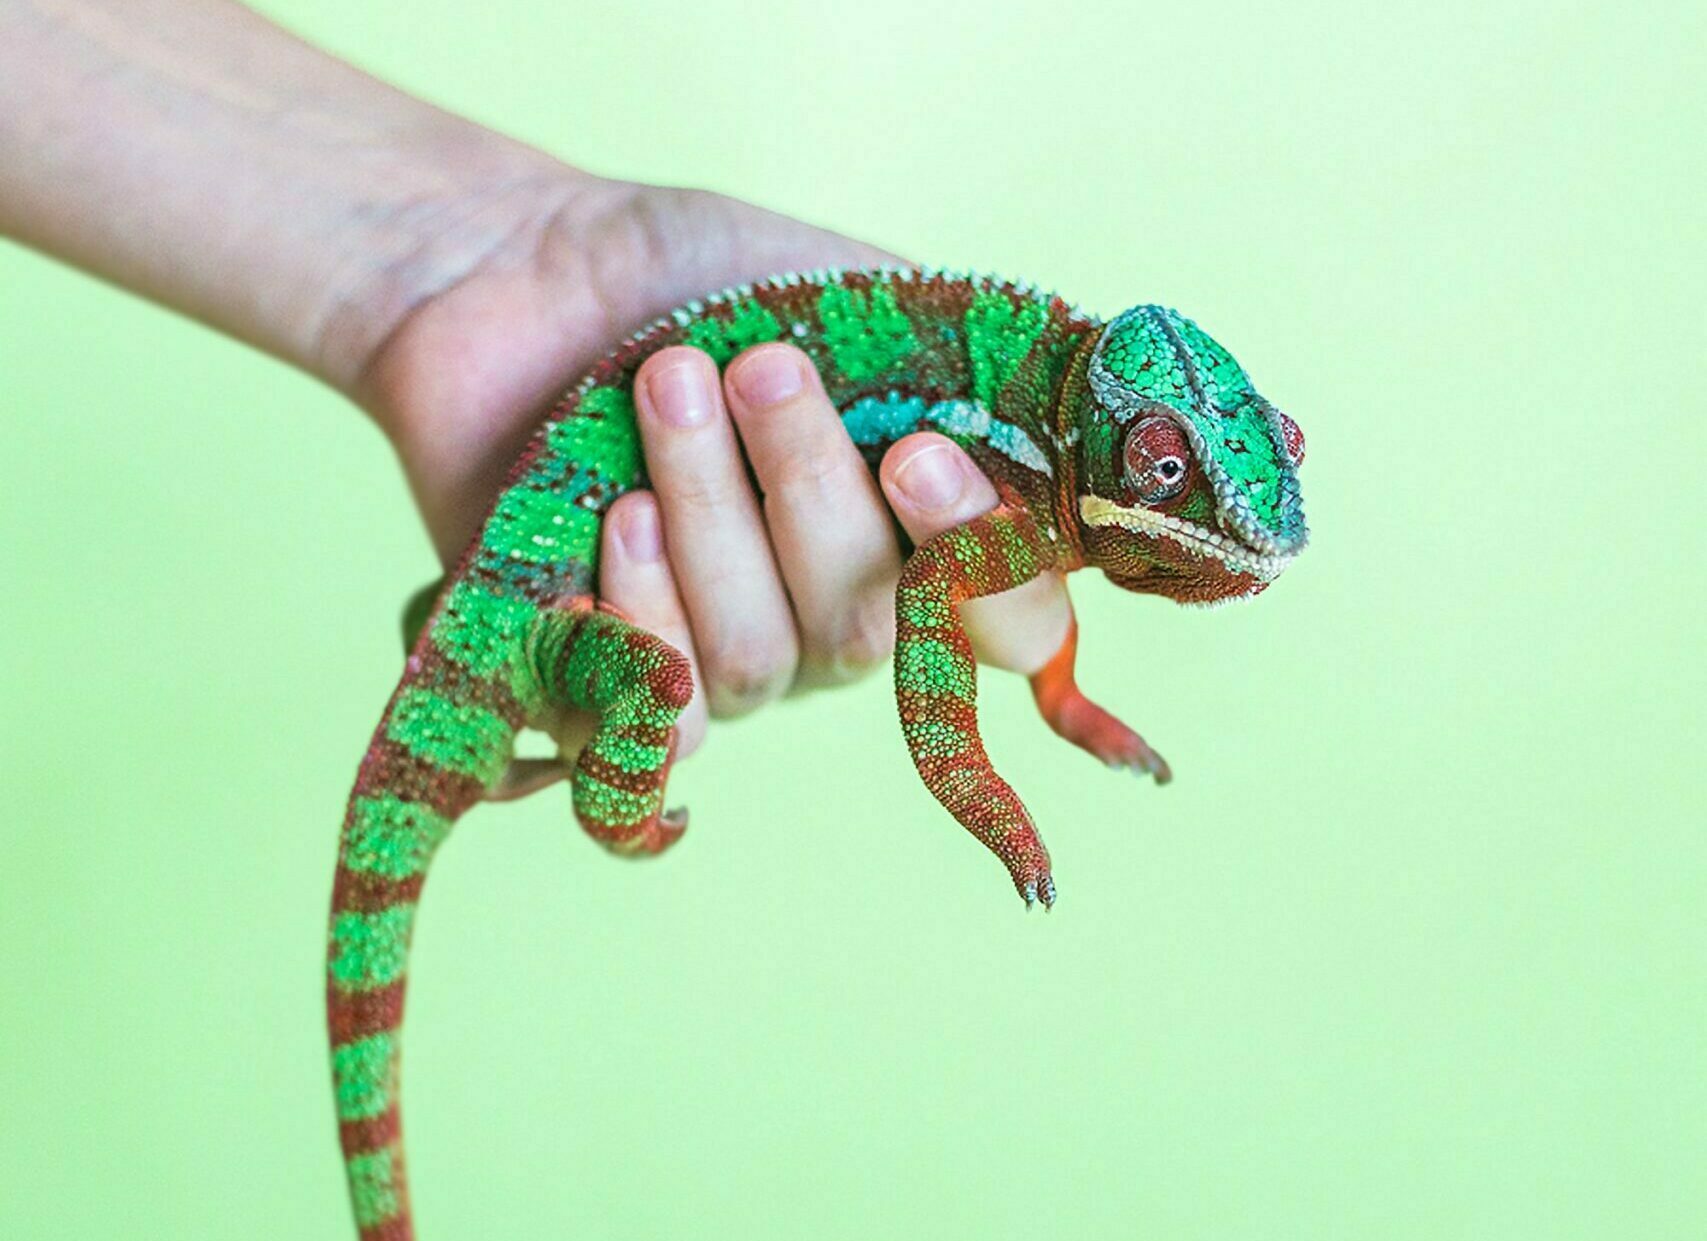 Green/blue/orange chameleon in a human hand | SUSE Private